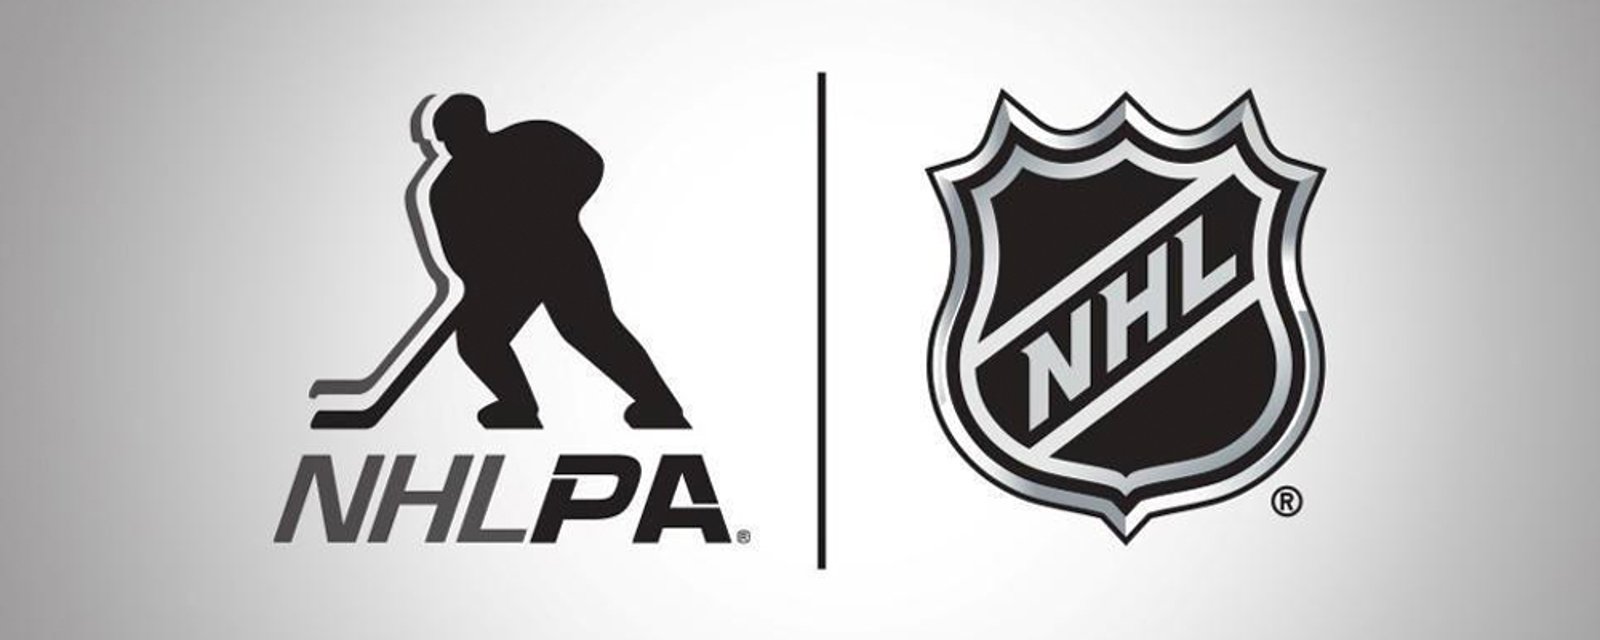 NHL players hold an important vote regarding pay and the 2019-20 season